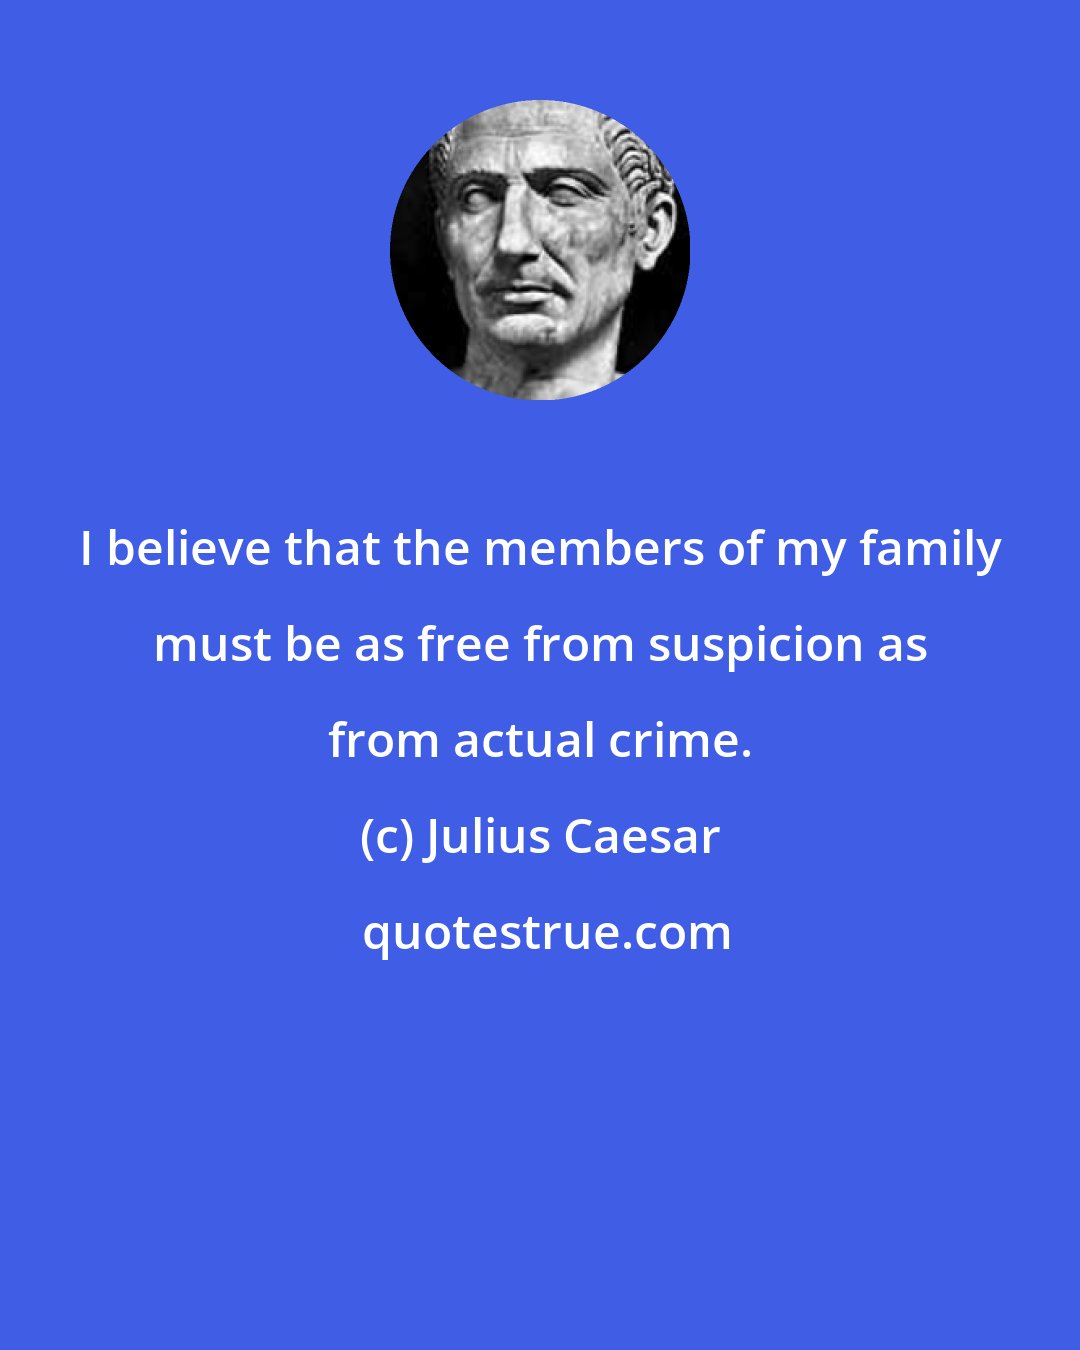 Julius Caesar: I believe that the members of my family must be as free from suspicion as from actual crime.